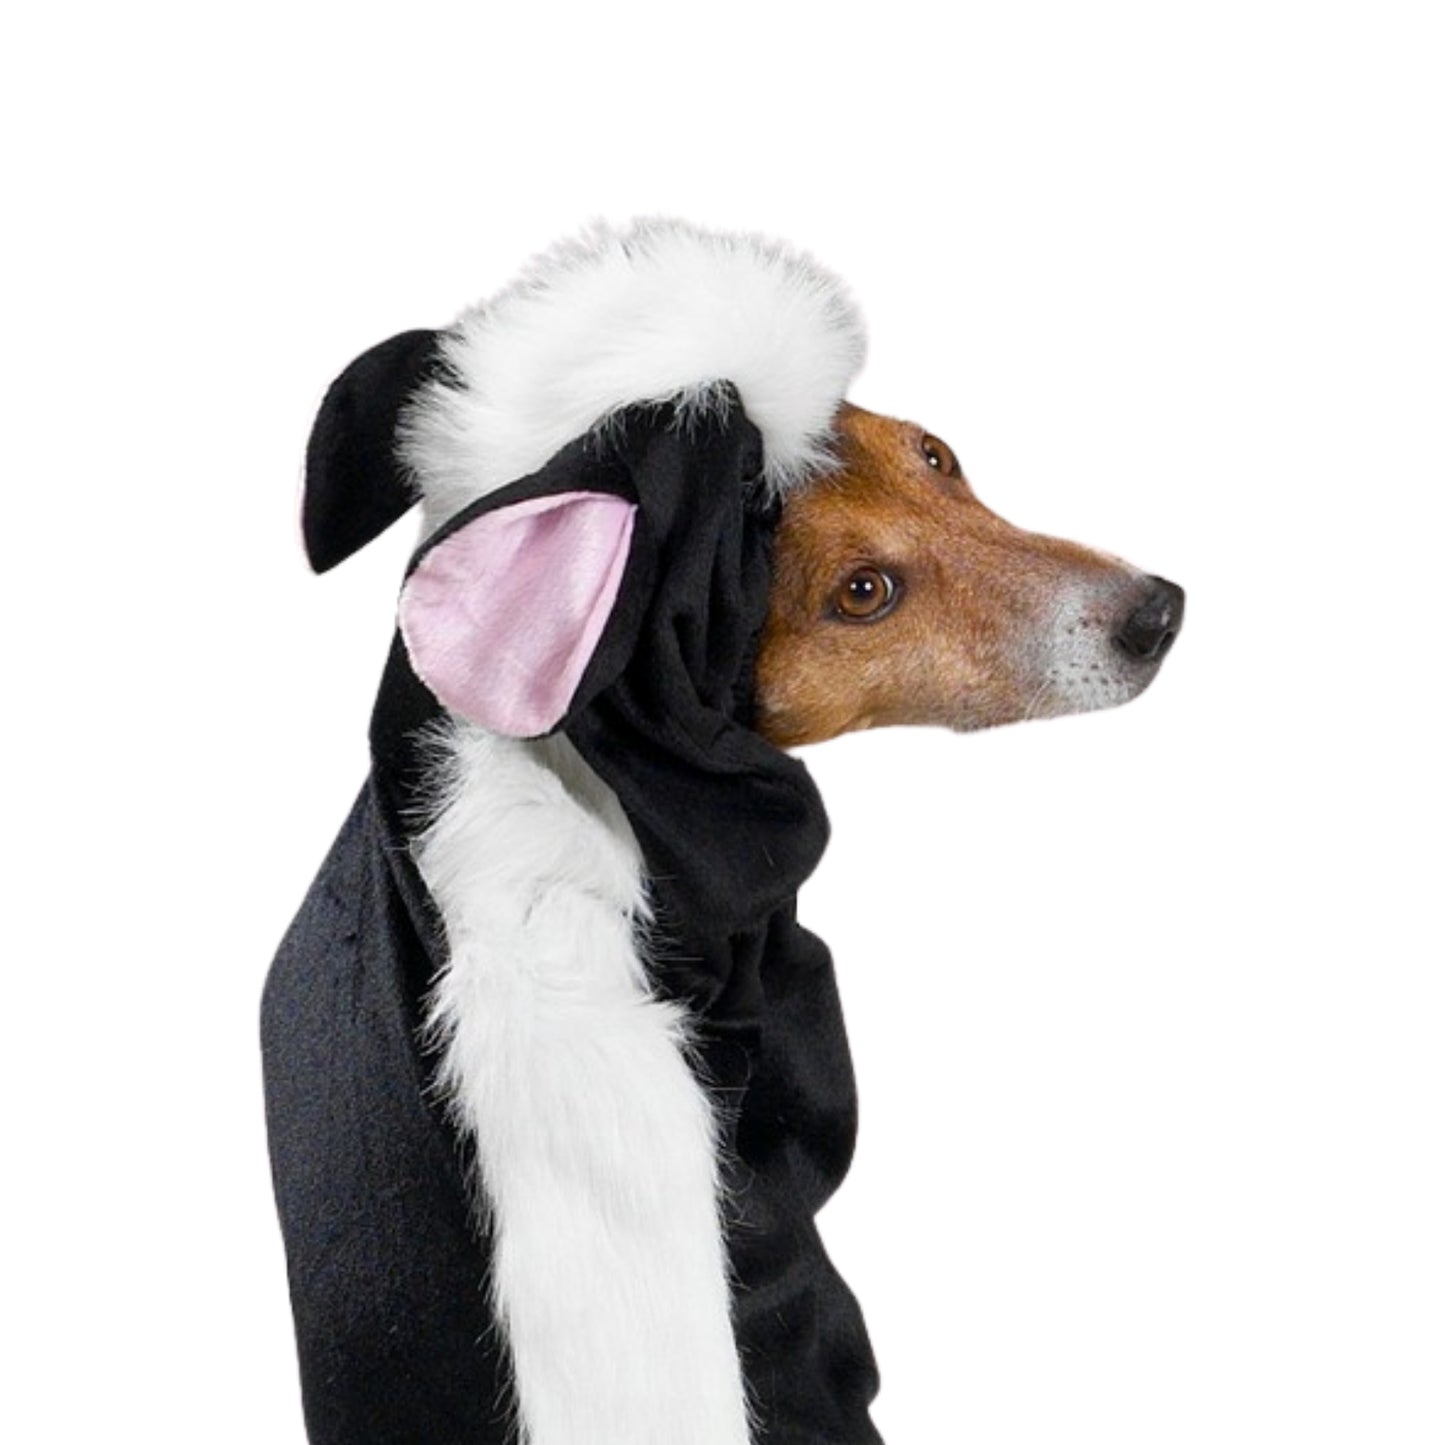 Casual Canine Lil' Stinker Dog Costume, Small (fits lengths up to 12"), Black/White